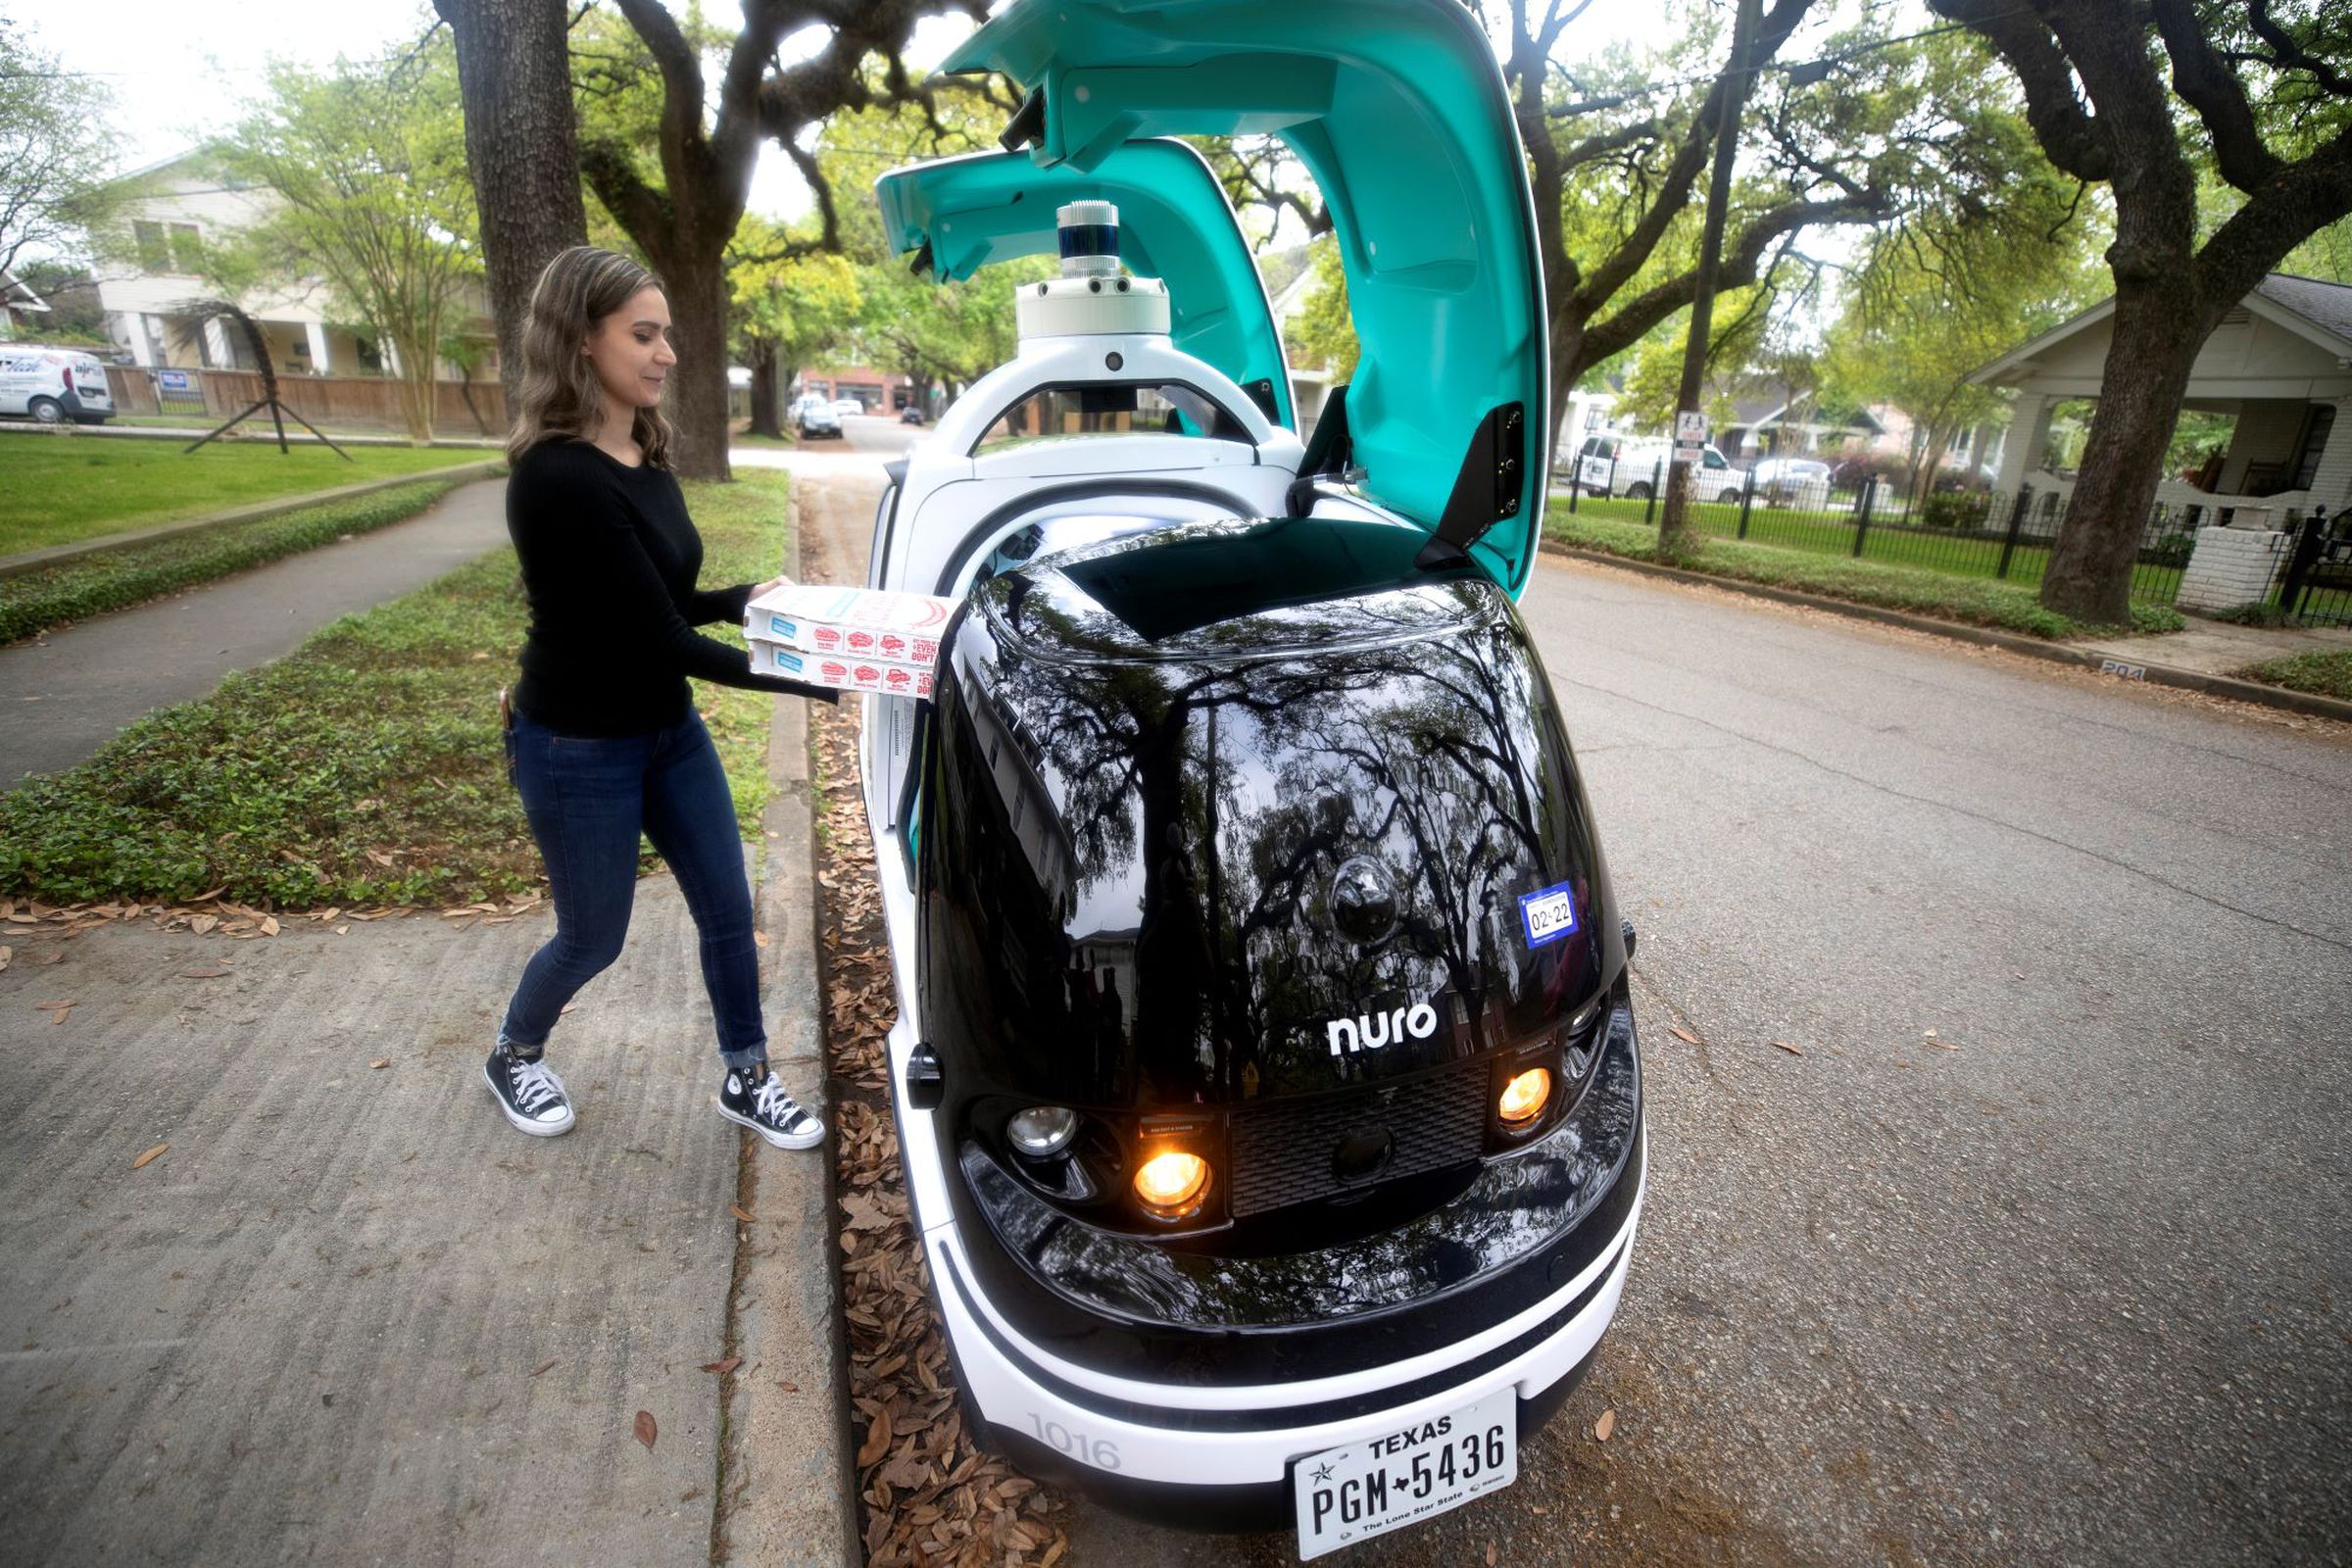 A customer retrieves her pizzas from Nuro’s R2 delivery robot.